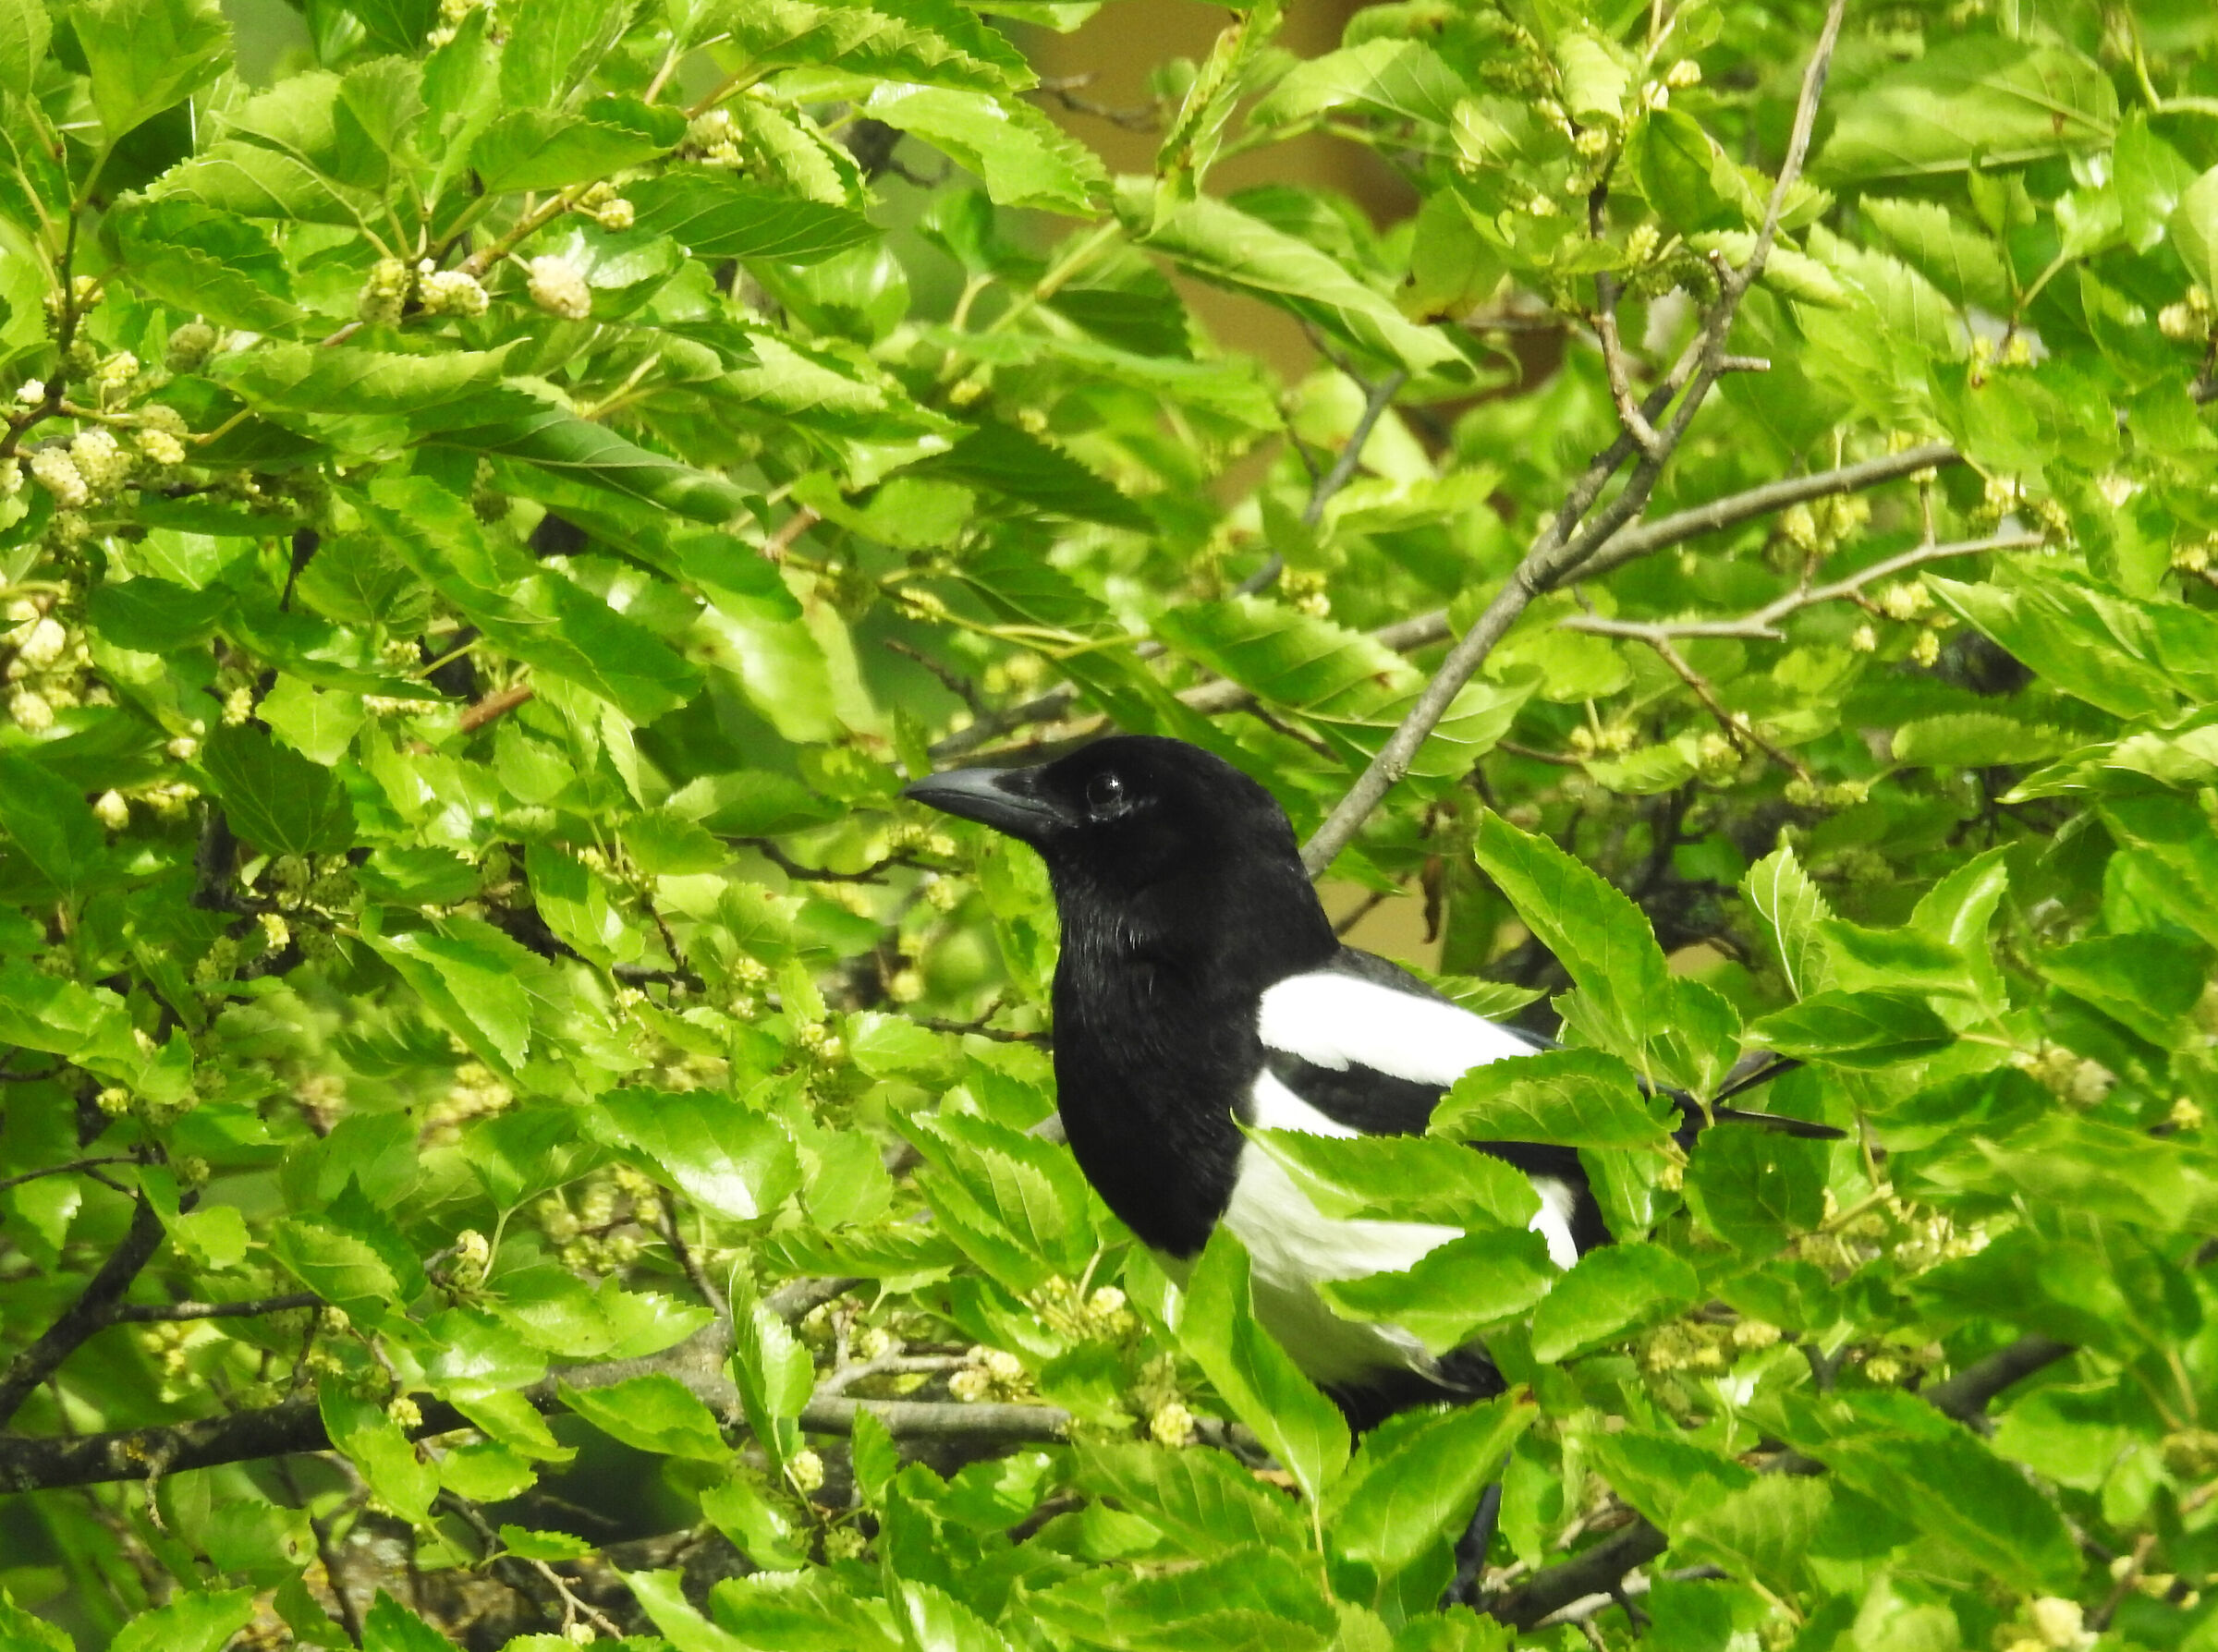 The magpie on the mulberry tree...